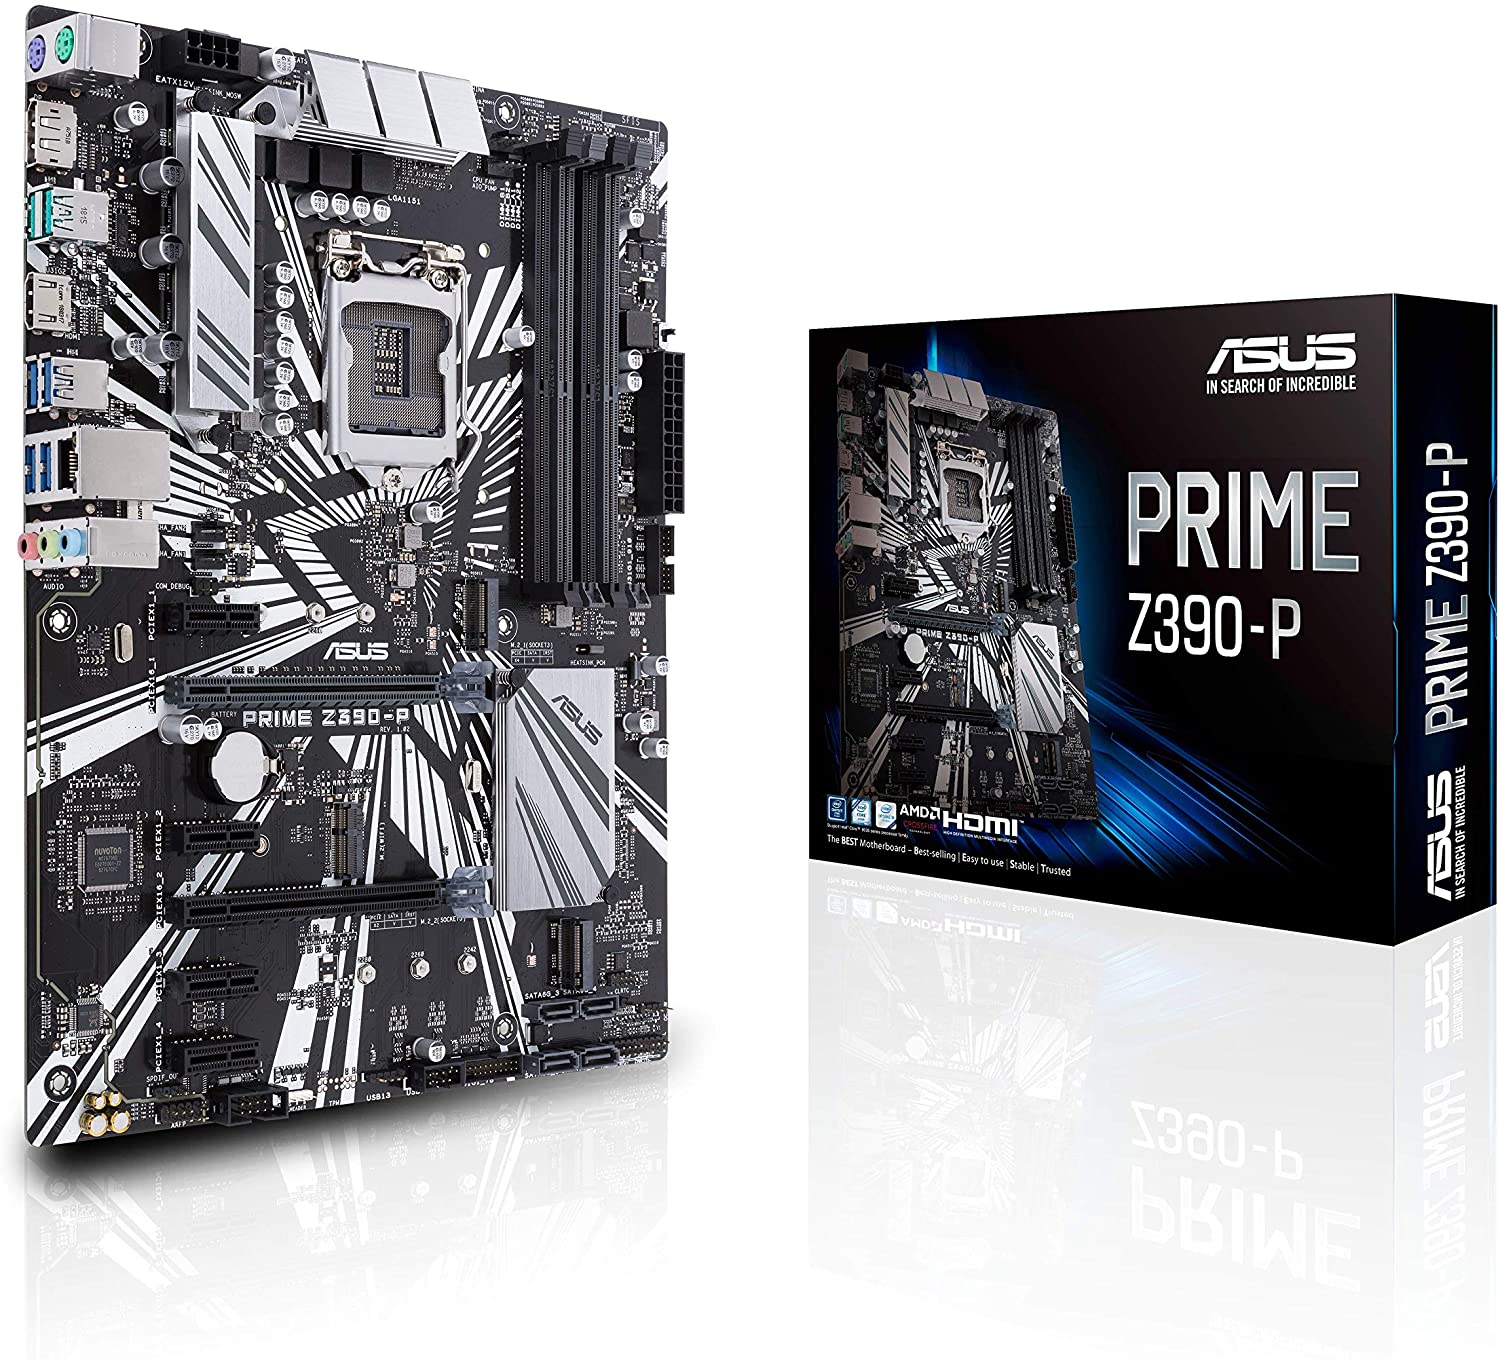 ASUS-Prime-Z390-P-ATX-Motherboard-for-Cryptocurrency-Mining-BTC.jpg (768×696)